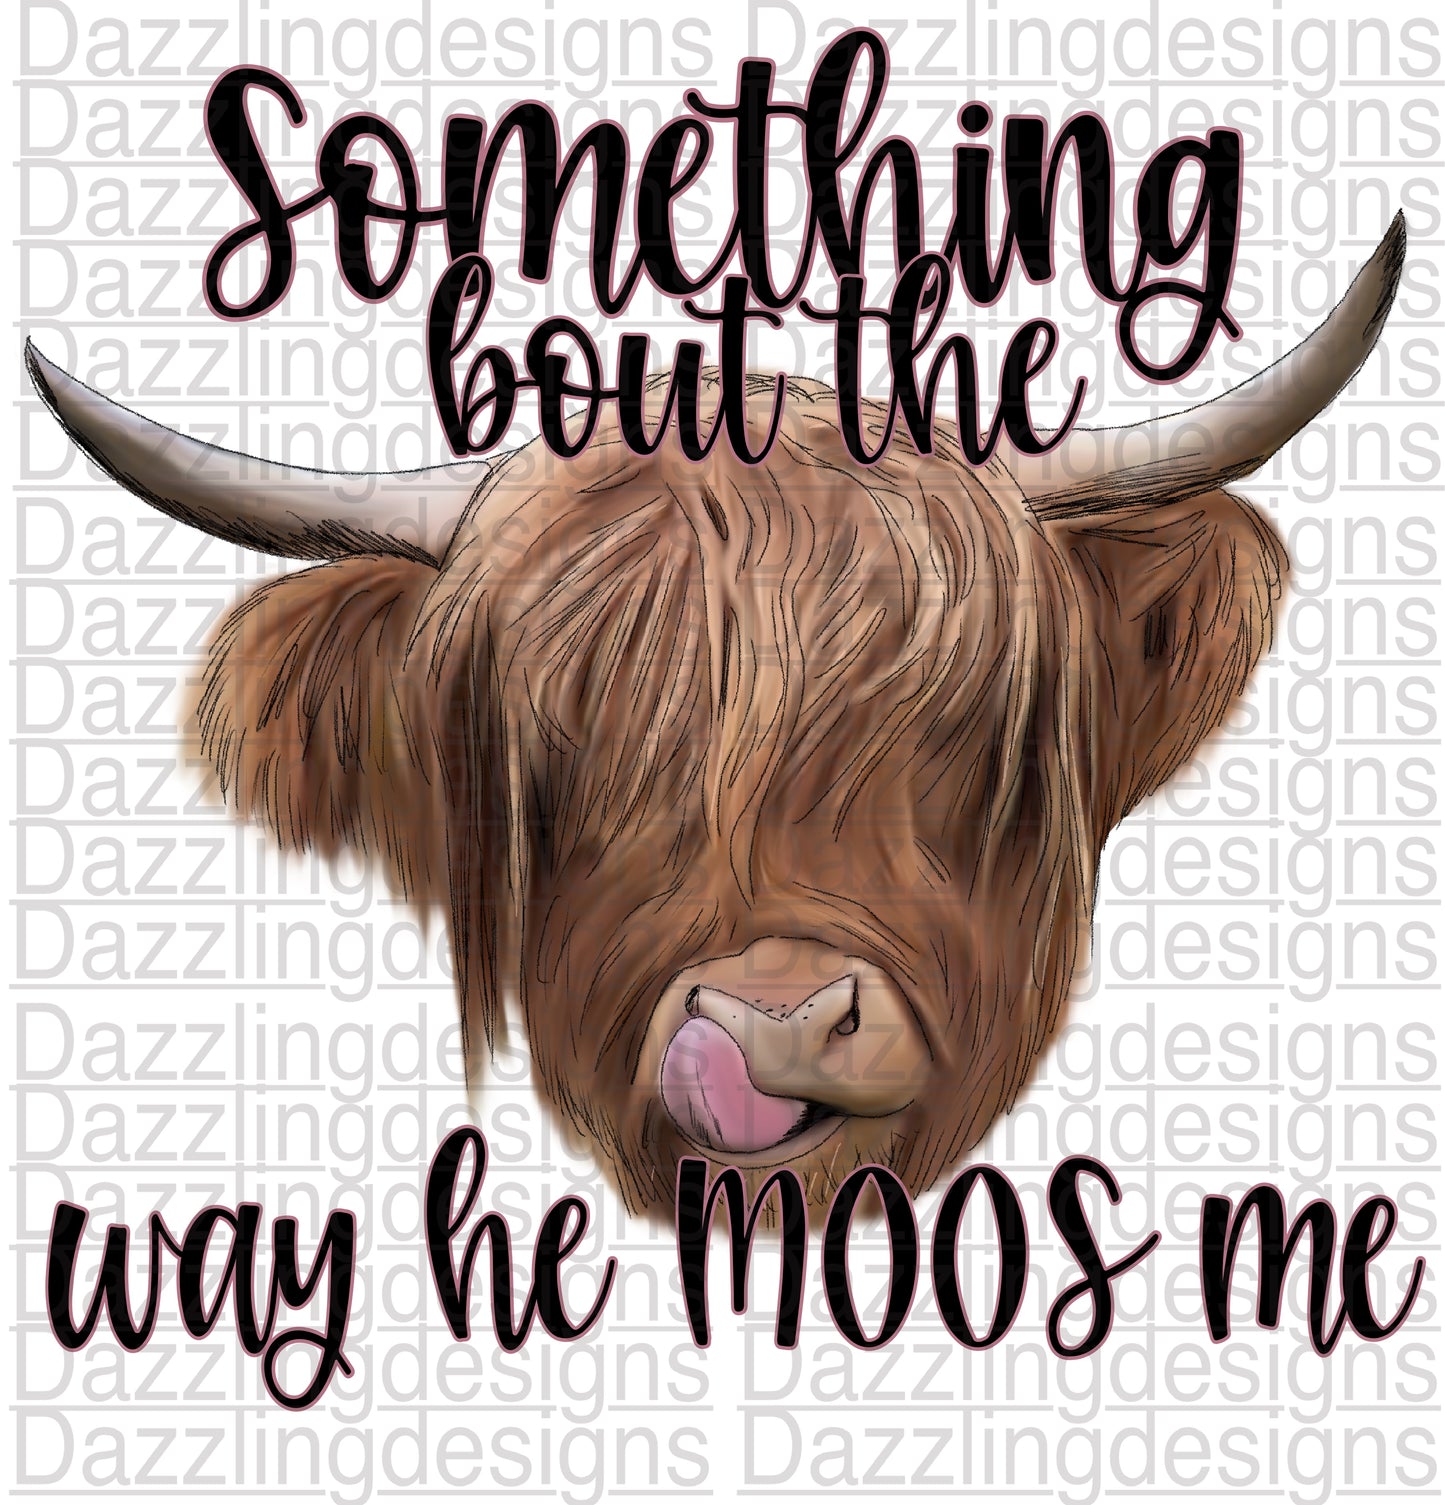 Something Bout the way he Moos Me Cow